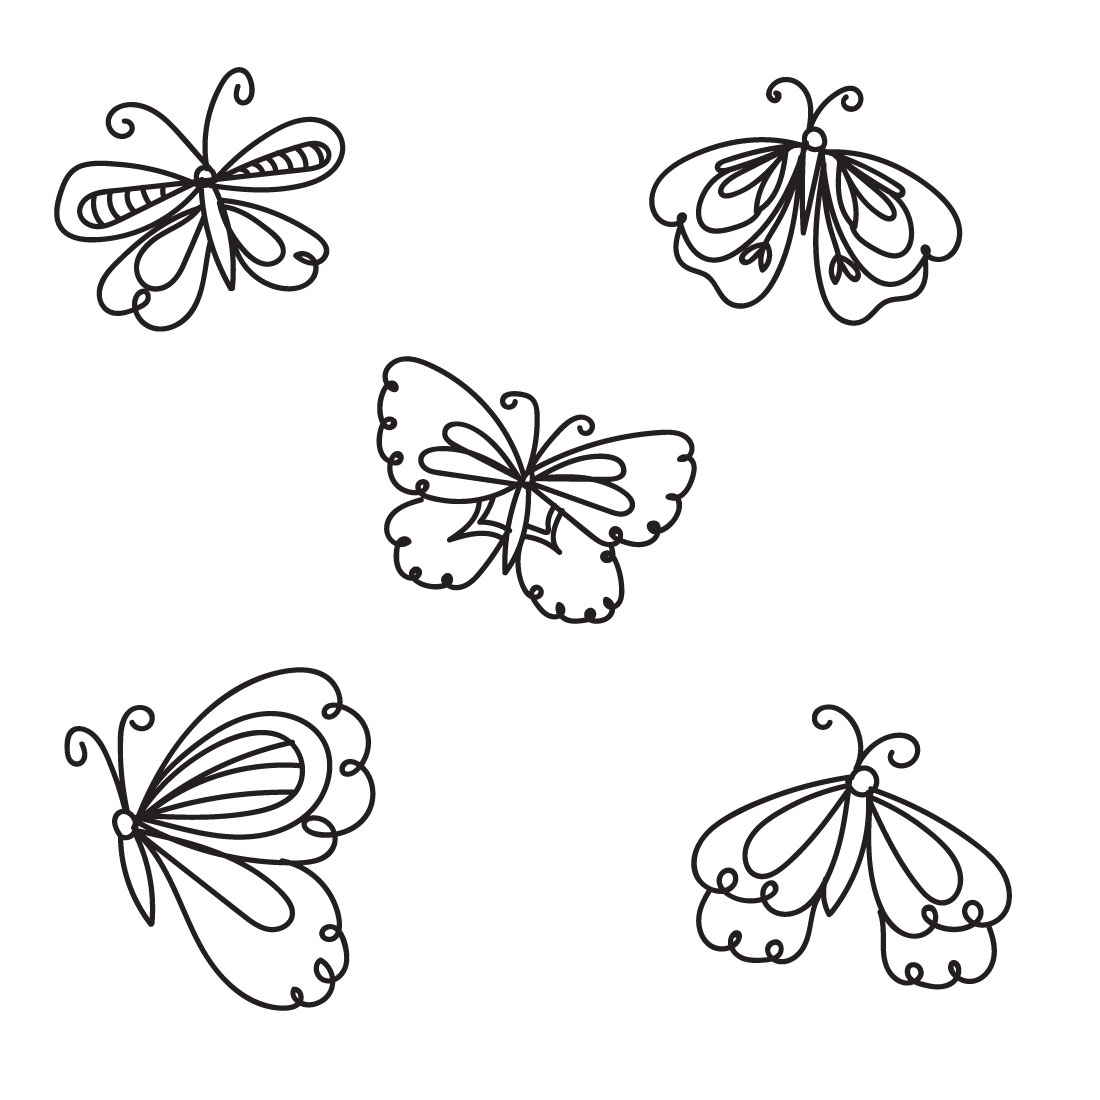 Four butterflies that are drawn in black and white.